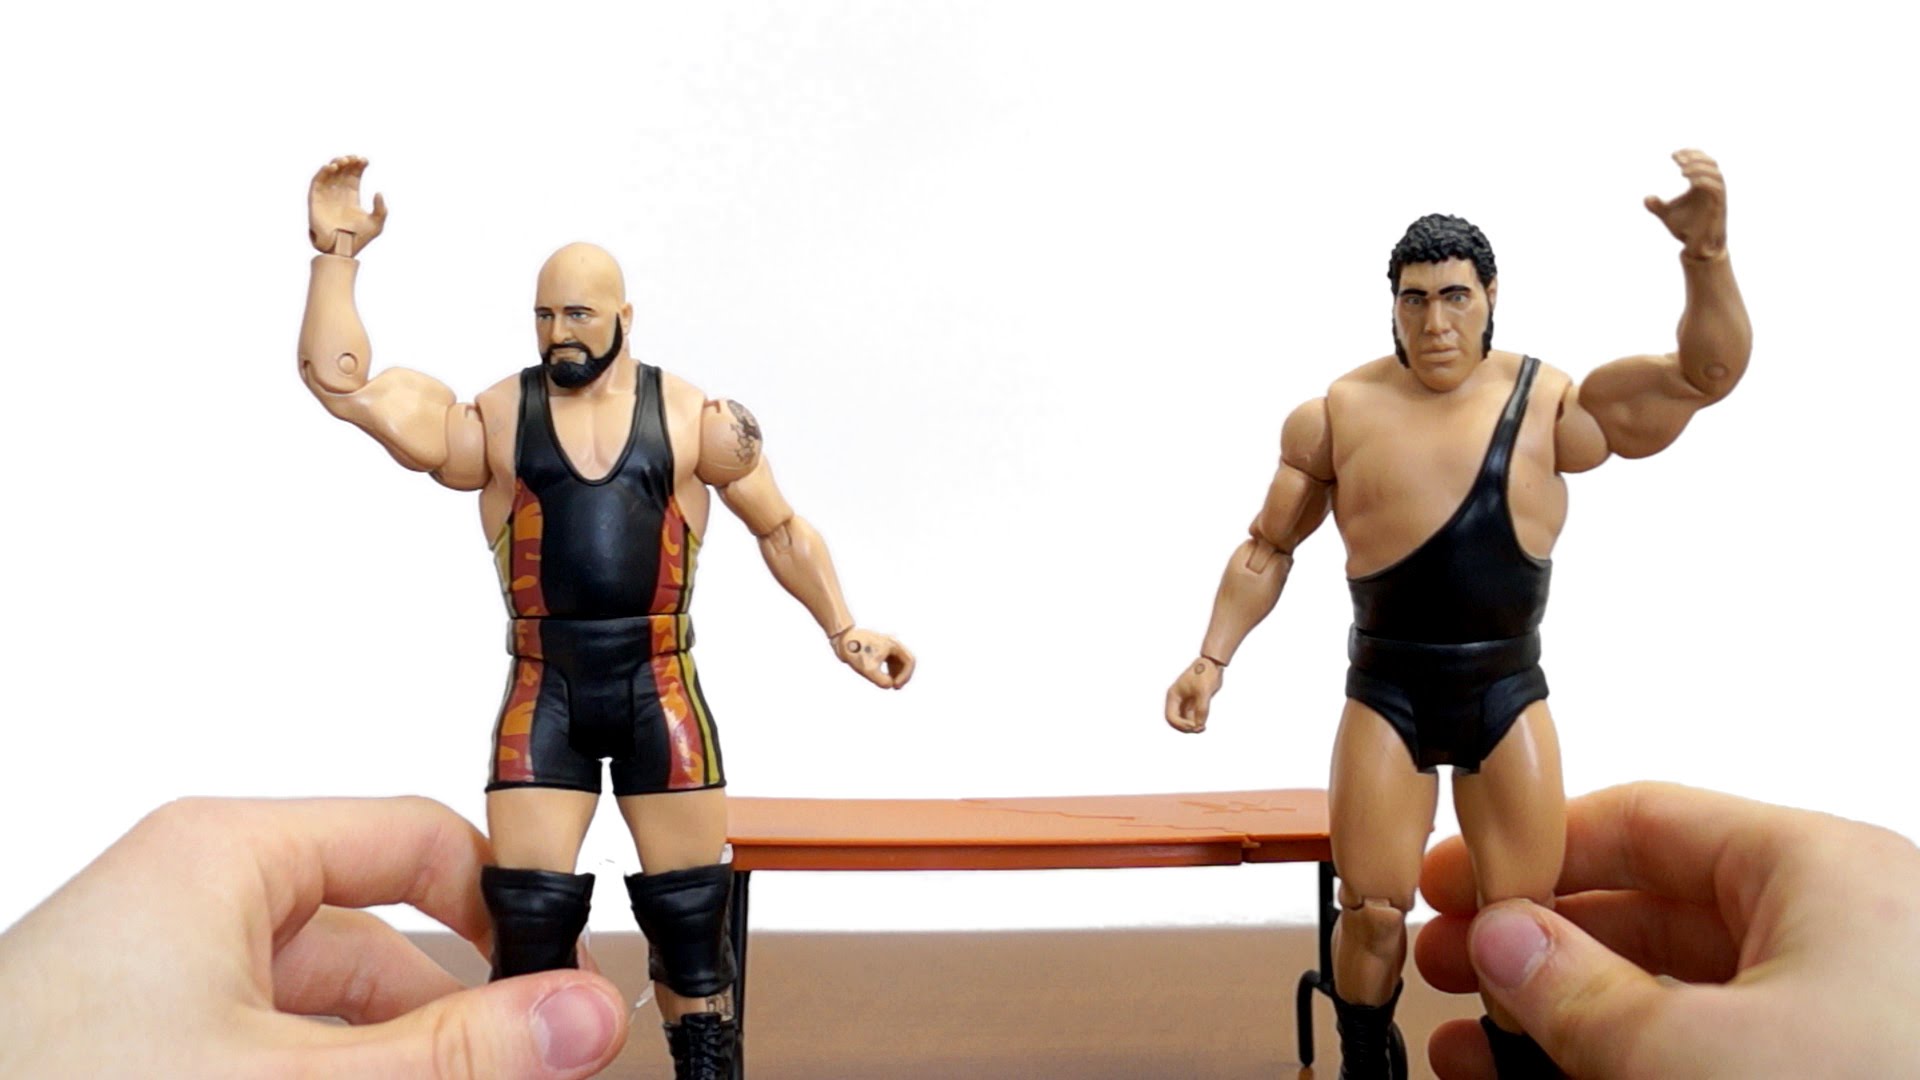  download Andre The Giant Big Show WWE Mattel Battle Pack 33 1920x1080